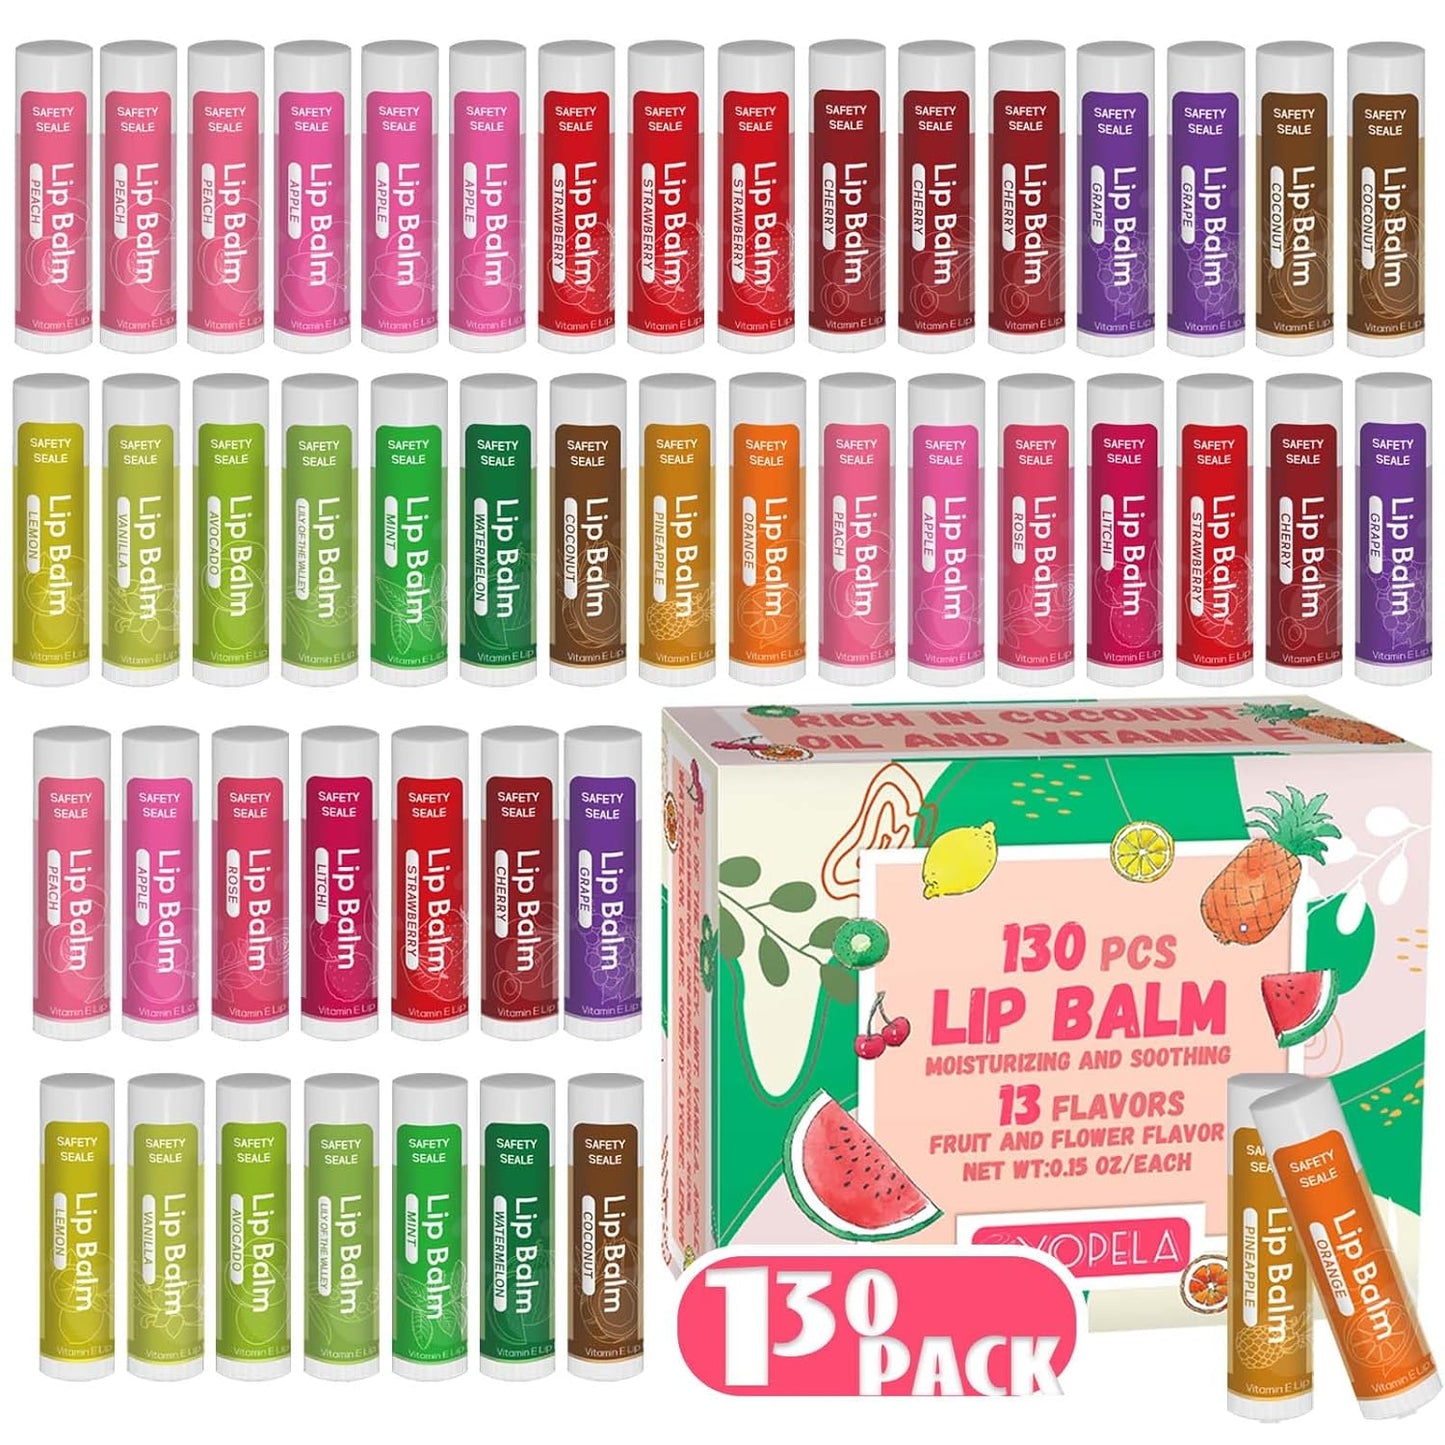 Yopela 130 Pack Natural Lip Balm Sets with Vitamin E and Coconut Oil